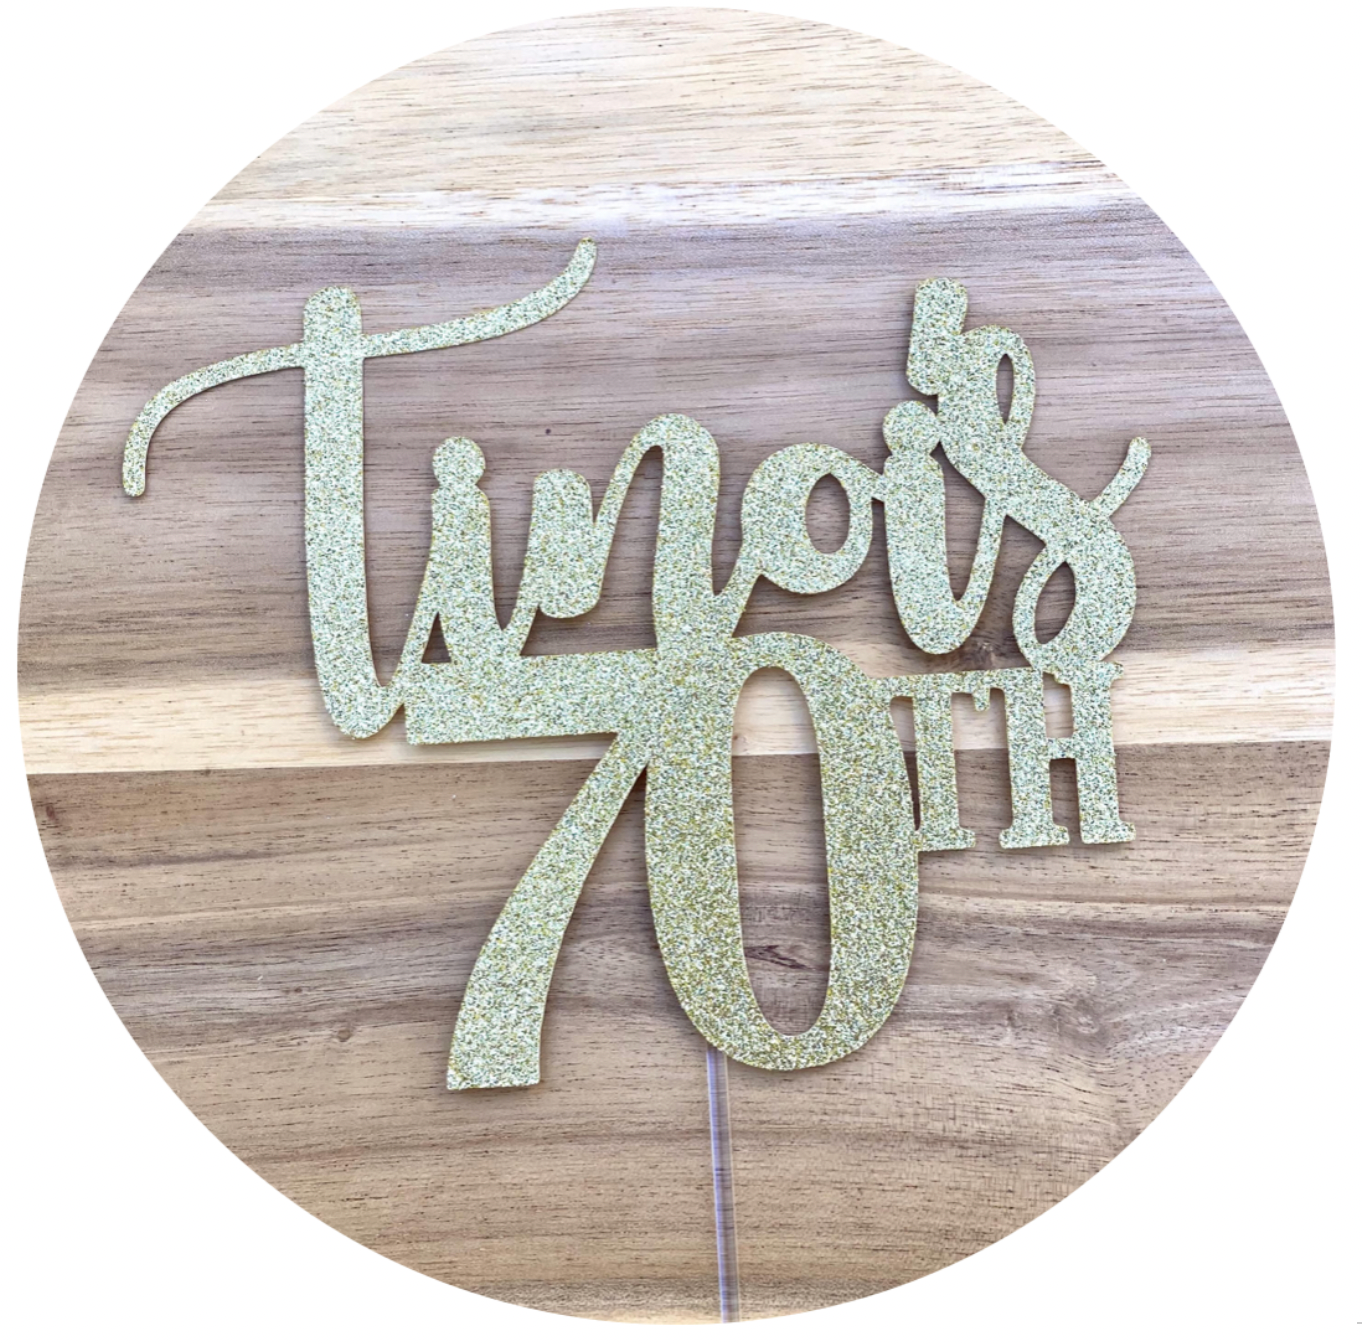 Name's Age #1 Birthday Personalised Glitter Cake Topper